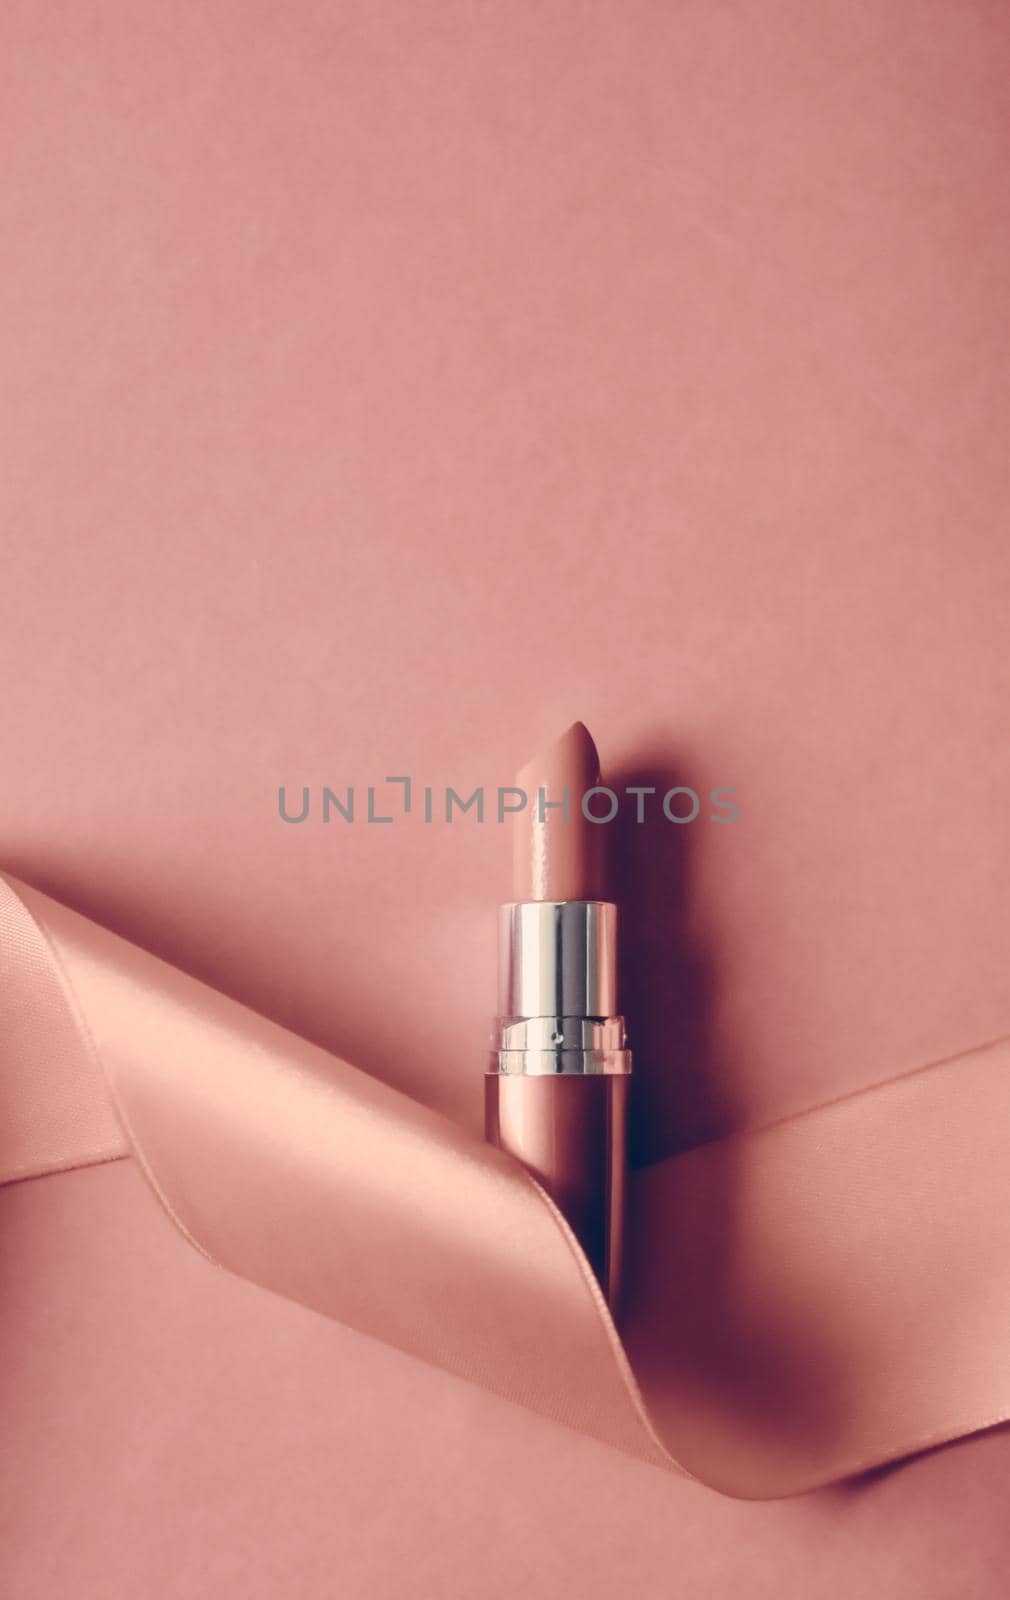 Luxury lipstick and silk ribbon on blush pink holiday background, make-up and cosmetics flatlay for beauty brand product design by Anneleven